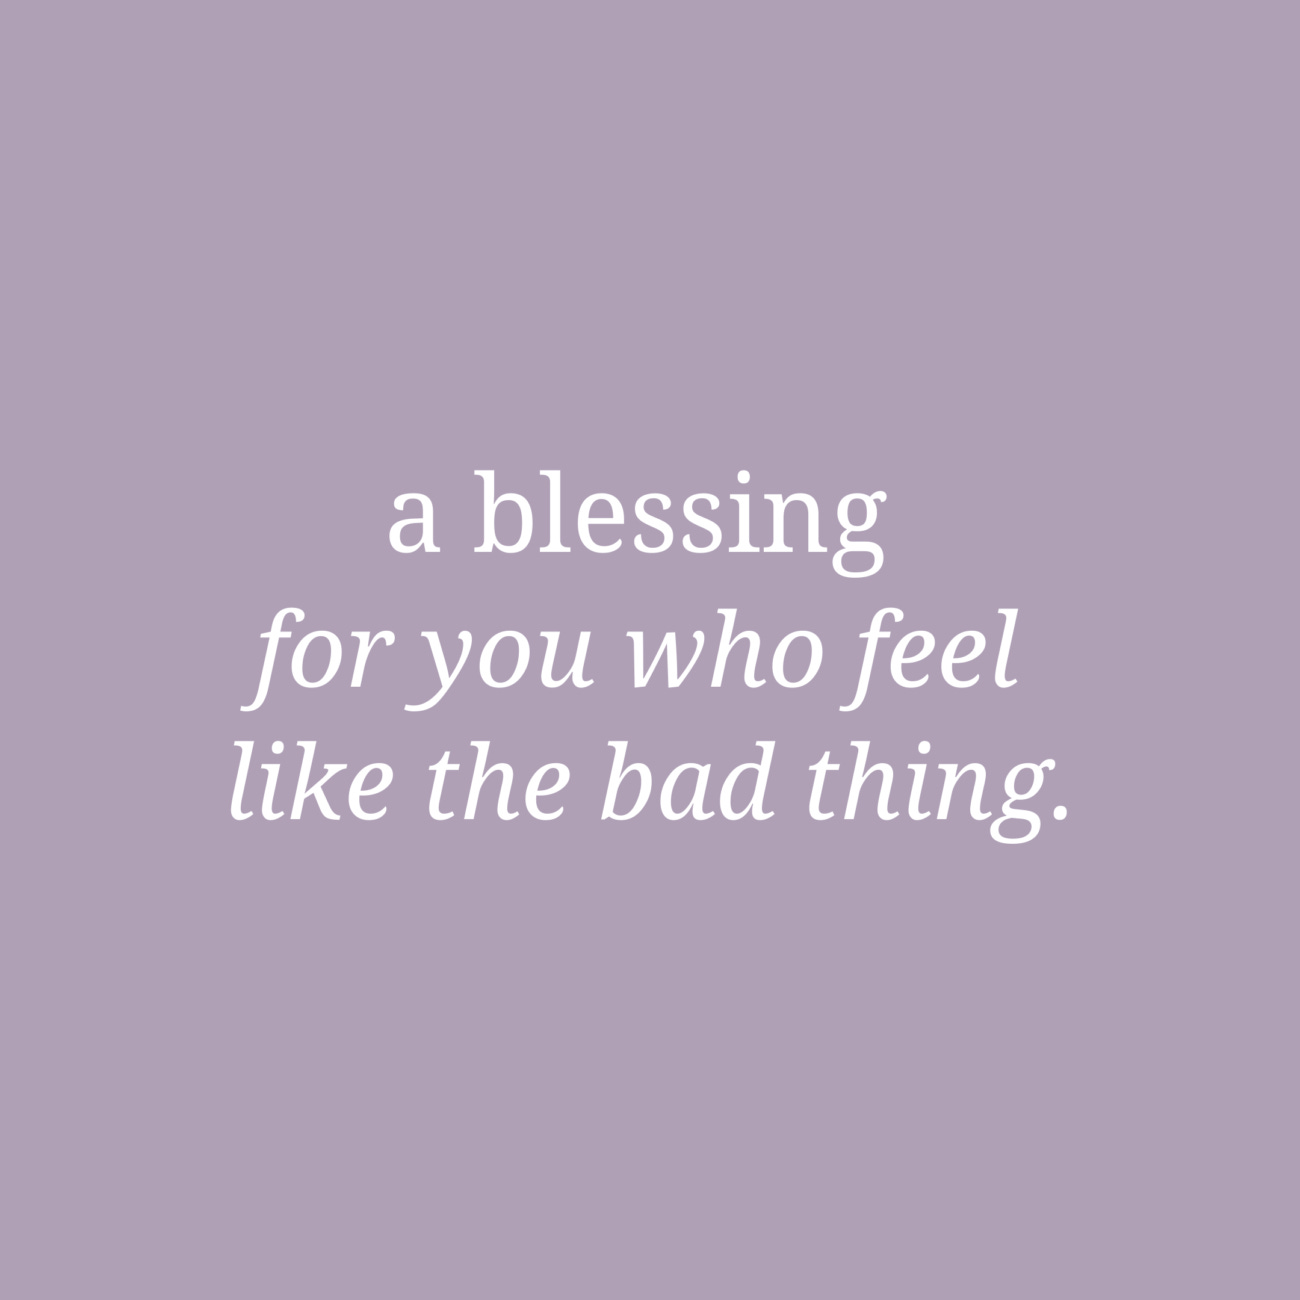 a purple square reads "a blessing for you who feel like the bad thing"